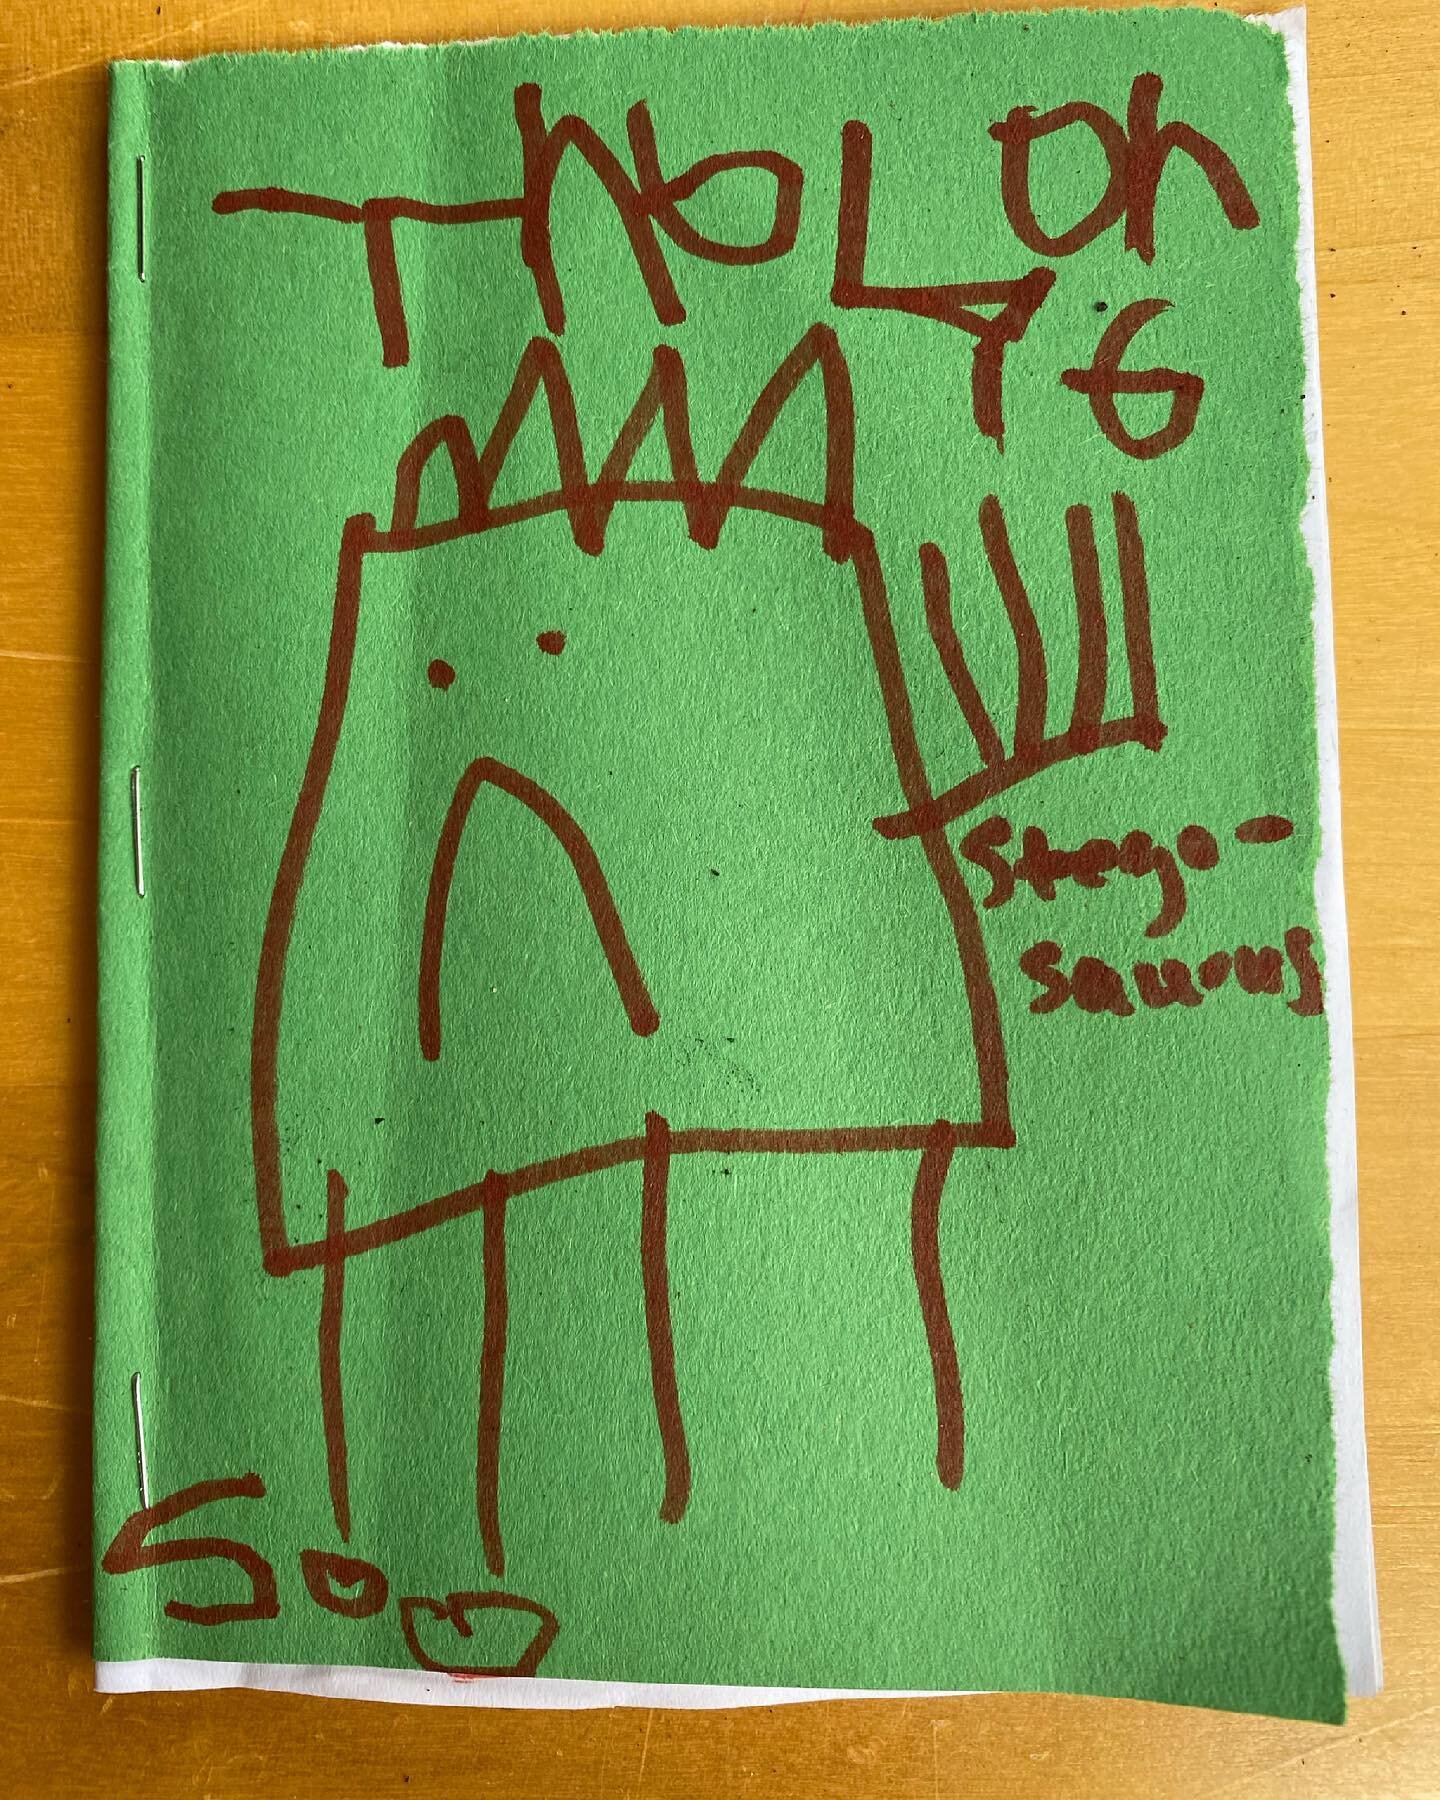 The Lonely Stegosaurus (A Love Story): Written and illustrated by Gus. 🦖 💚